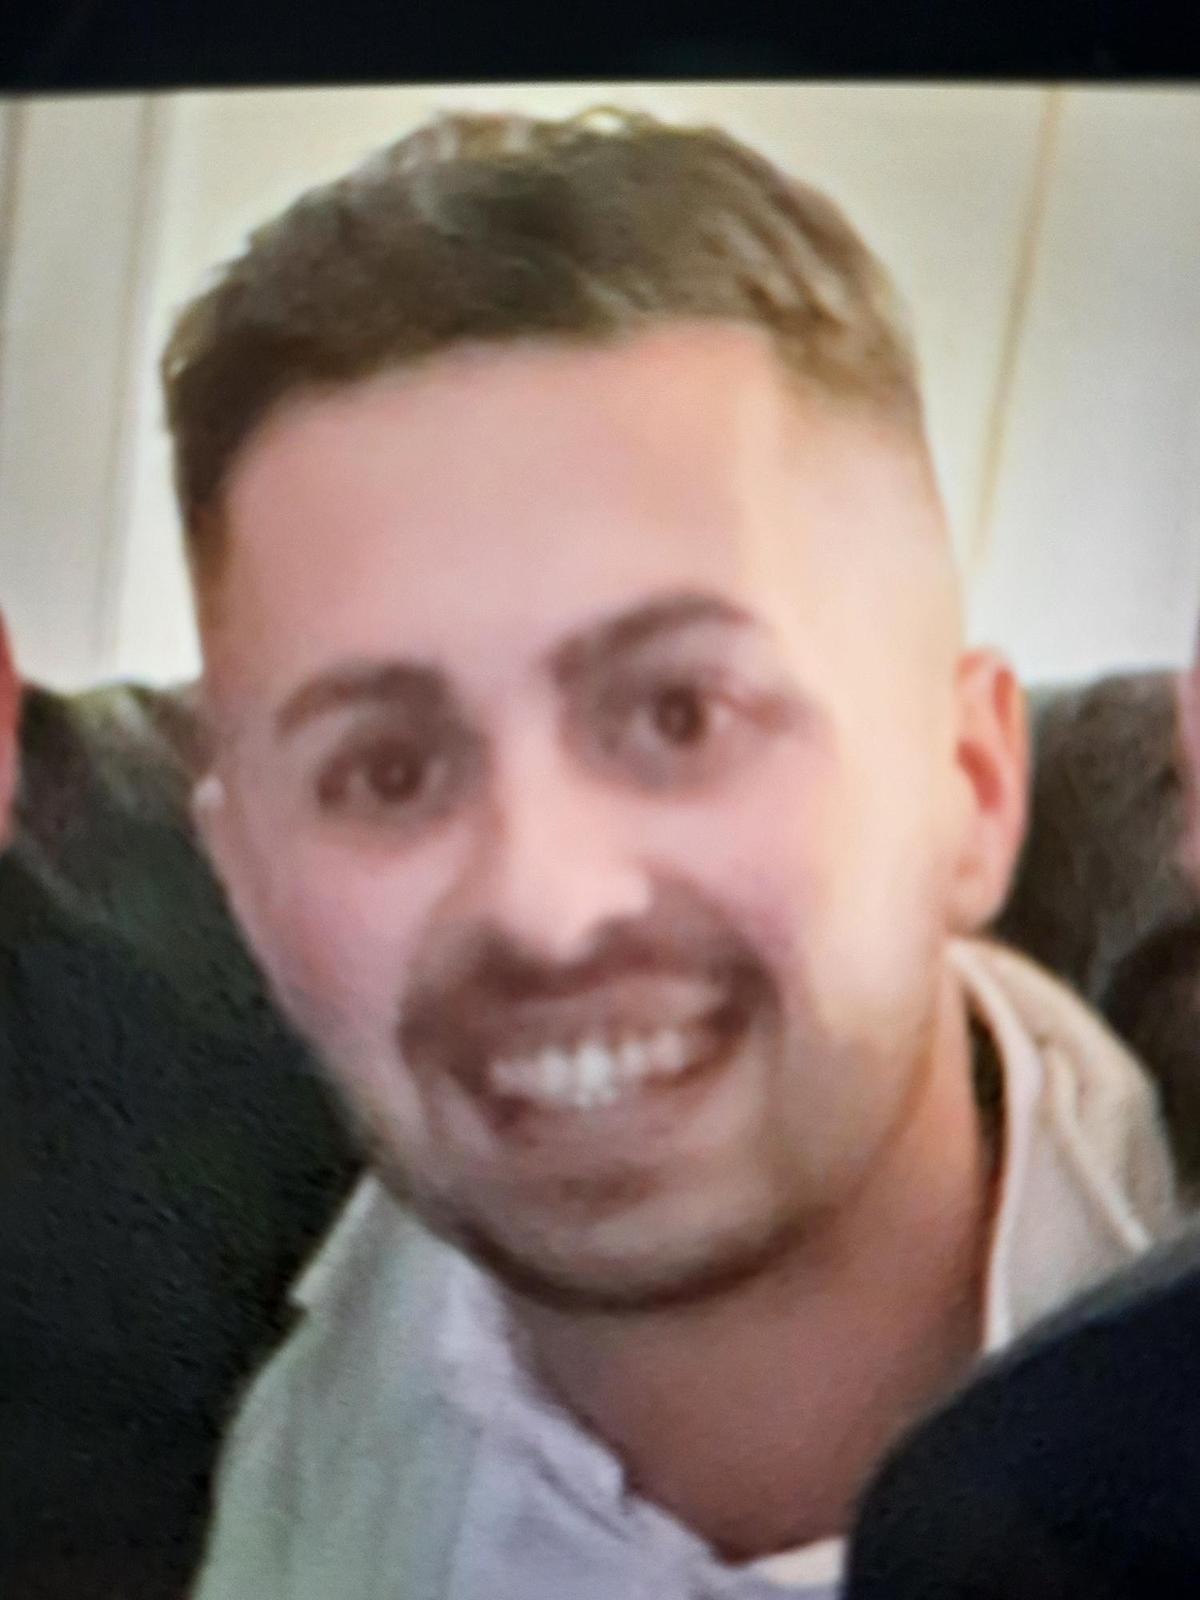 Increasing concern for welfare of missing Ben Mee last seen in Newry on March 18